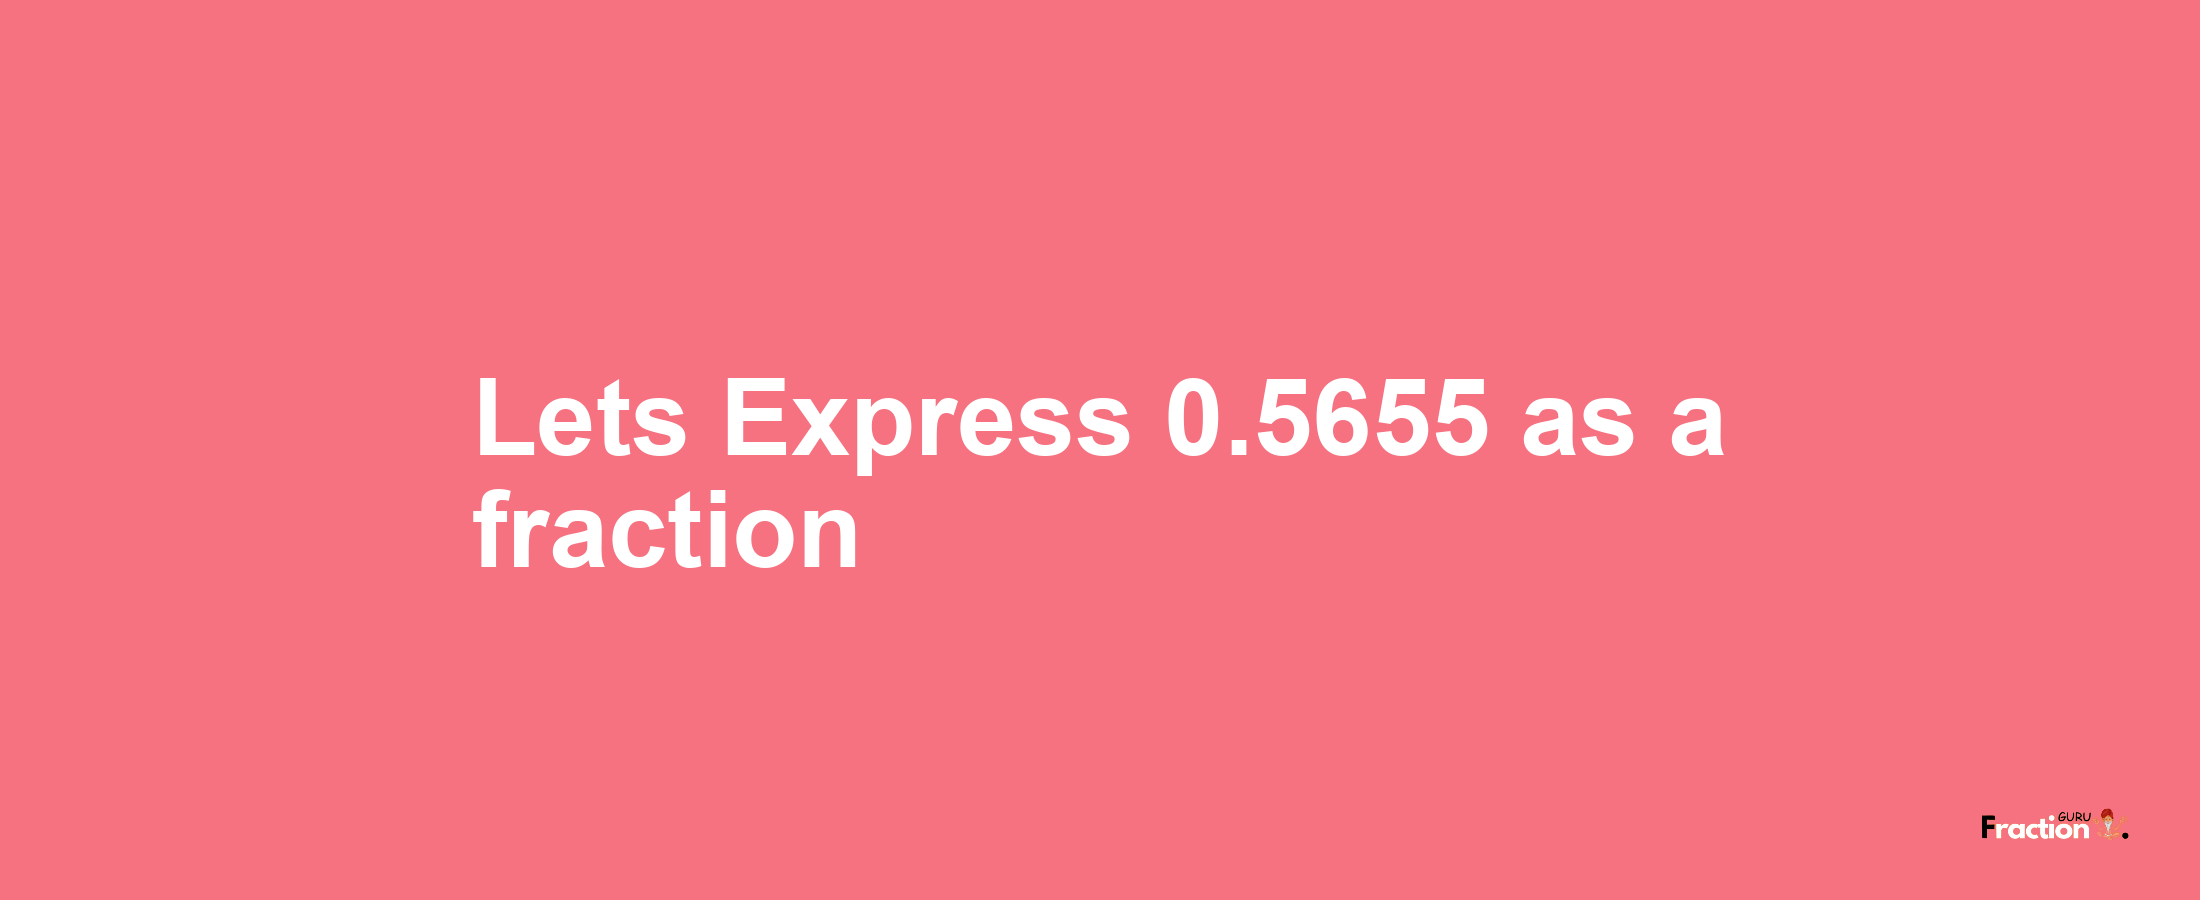 Lets Express 0.5655 as afraction